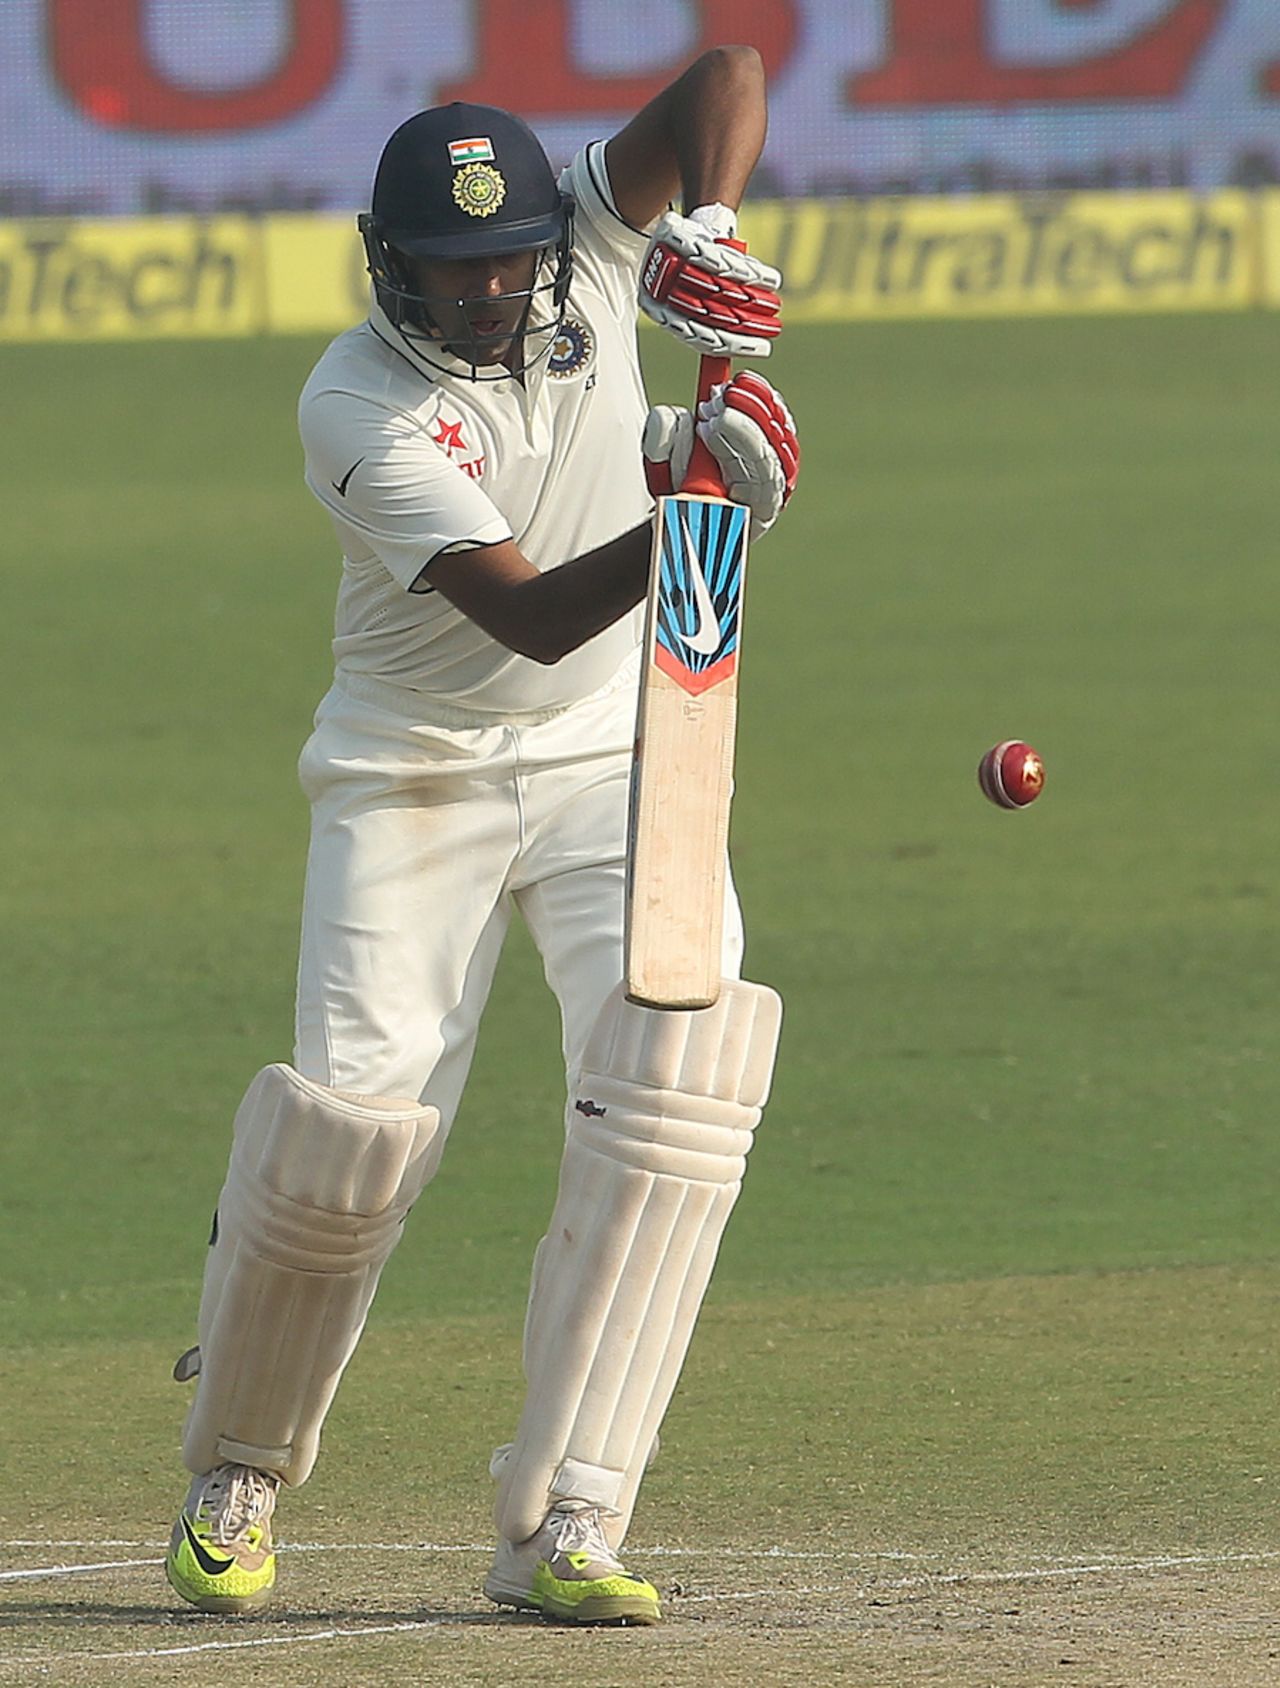 R Ashwin plays with a straight bat, India v South Africa, 4th Test, Delhi, 2nd day, December 4, 2015